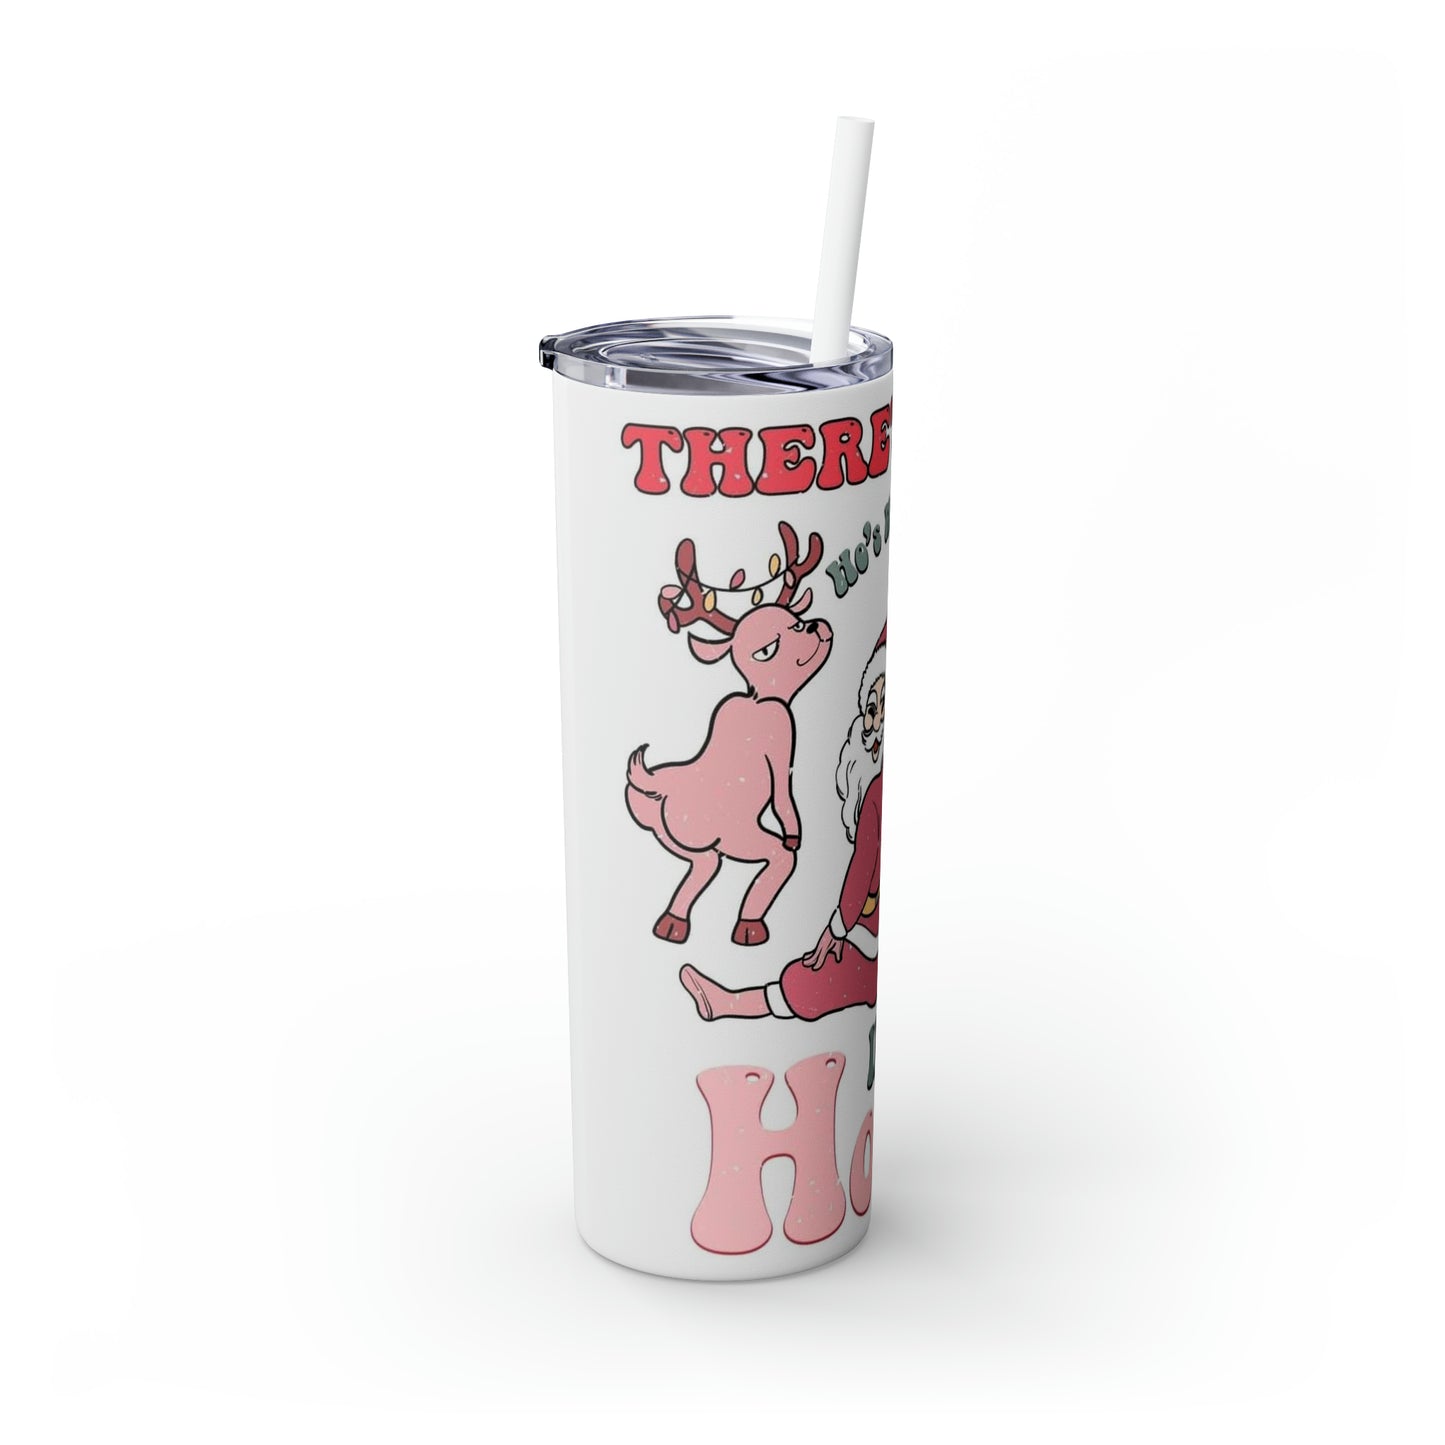 There’s Some Hoes In This House Santa Skinny Tumbler with Straw, 20oz